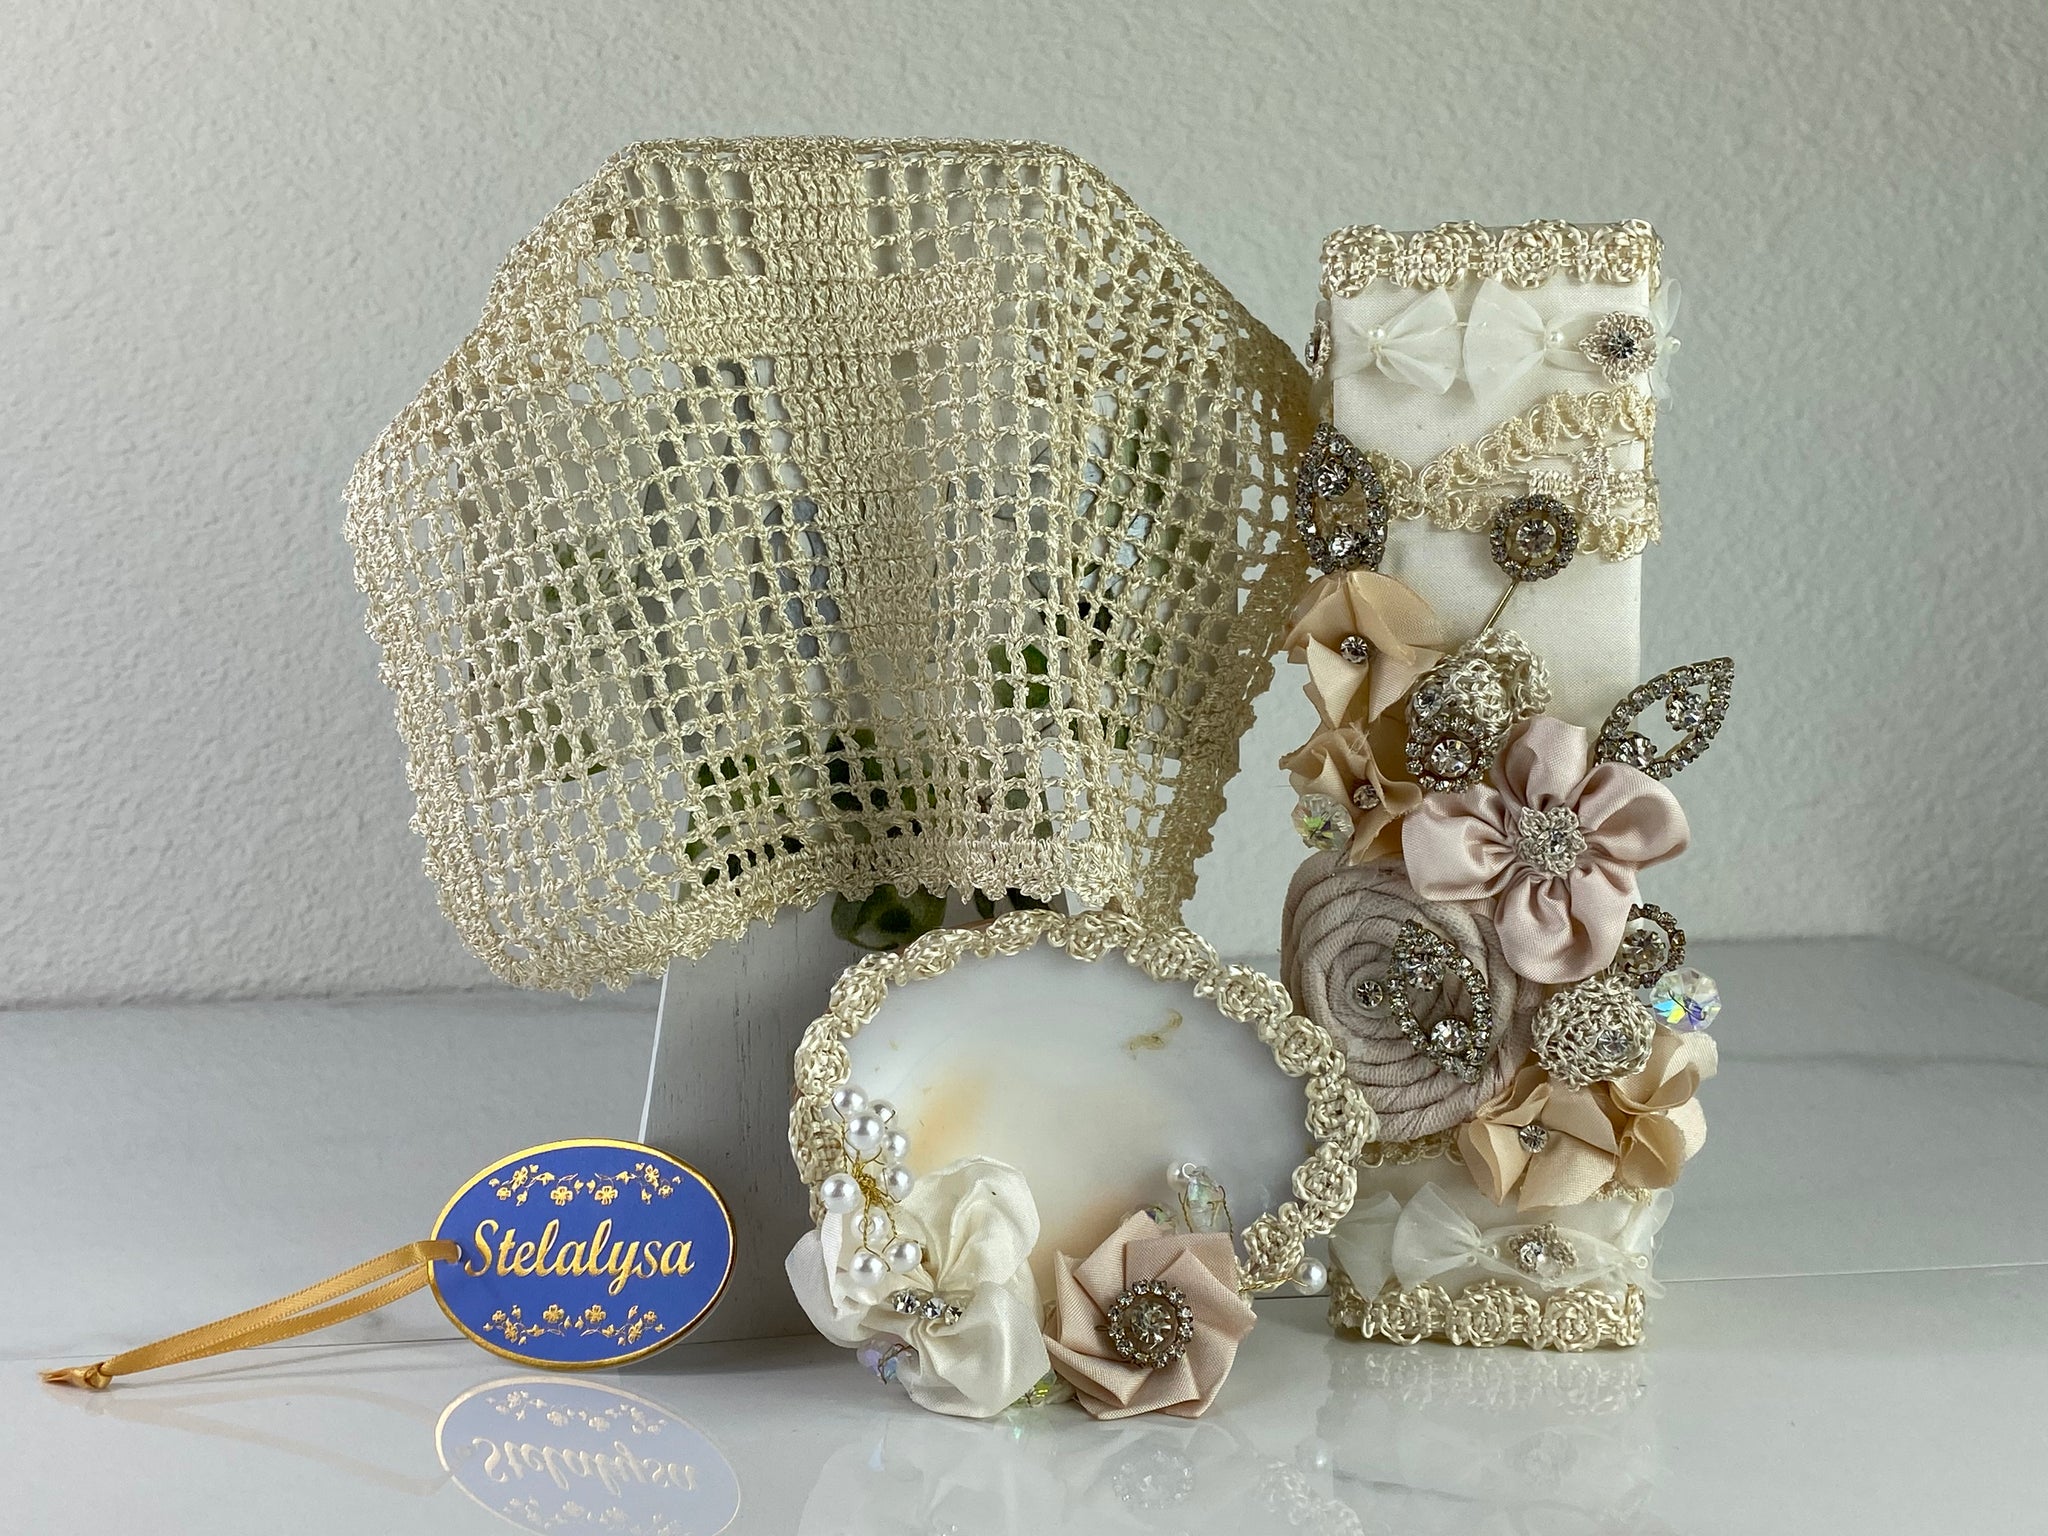 These one-of-a-kind Candle set is handmade and ivory in color.  This candle can also be use with a white baptism outfit because it has an array of light colors including white.   It is uniquely decorated with ribbon, pearls, crystals, flowers, and beads making it a gorgeous keepsake.   This candle is square in shape.    To match, the Shell is put together piece by piece to compliment the Candle and Handkerchief.  The Handkerchief is elegantly crotchet with a lovely cross